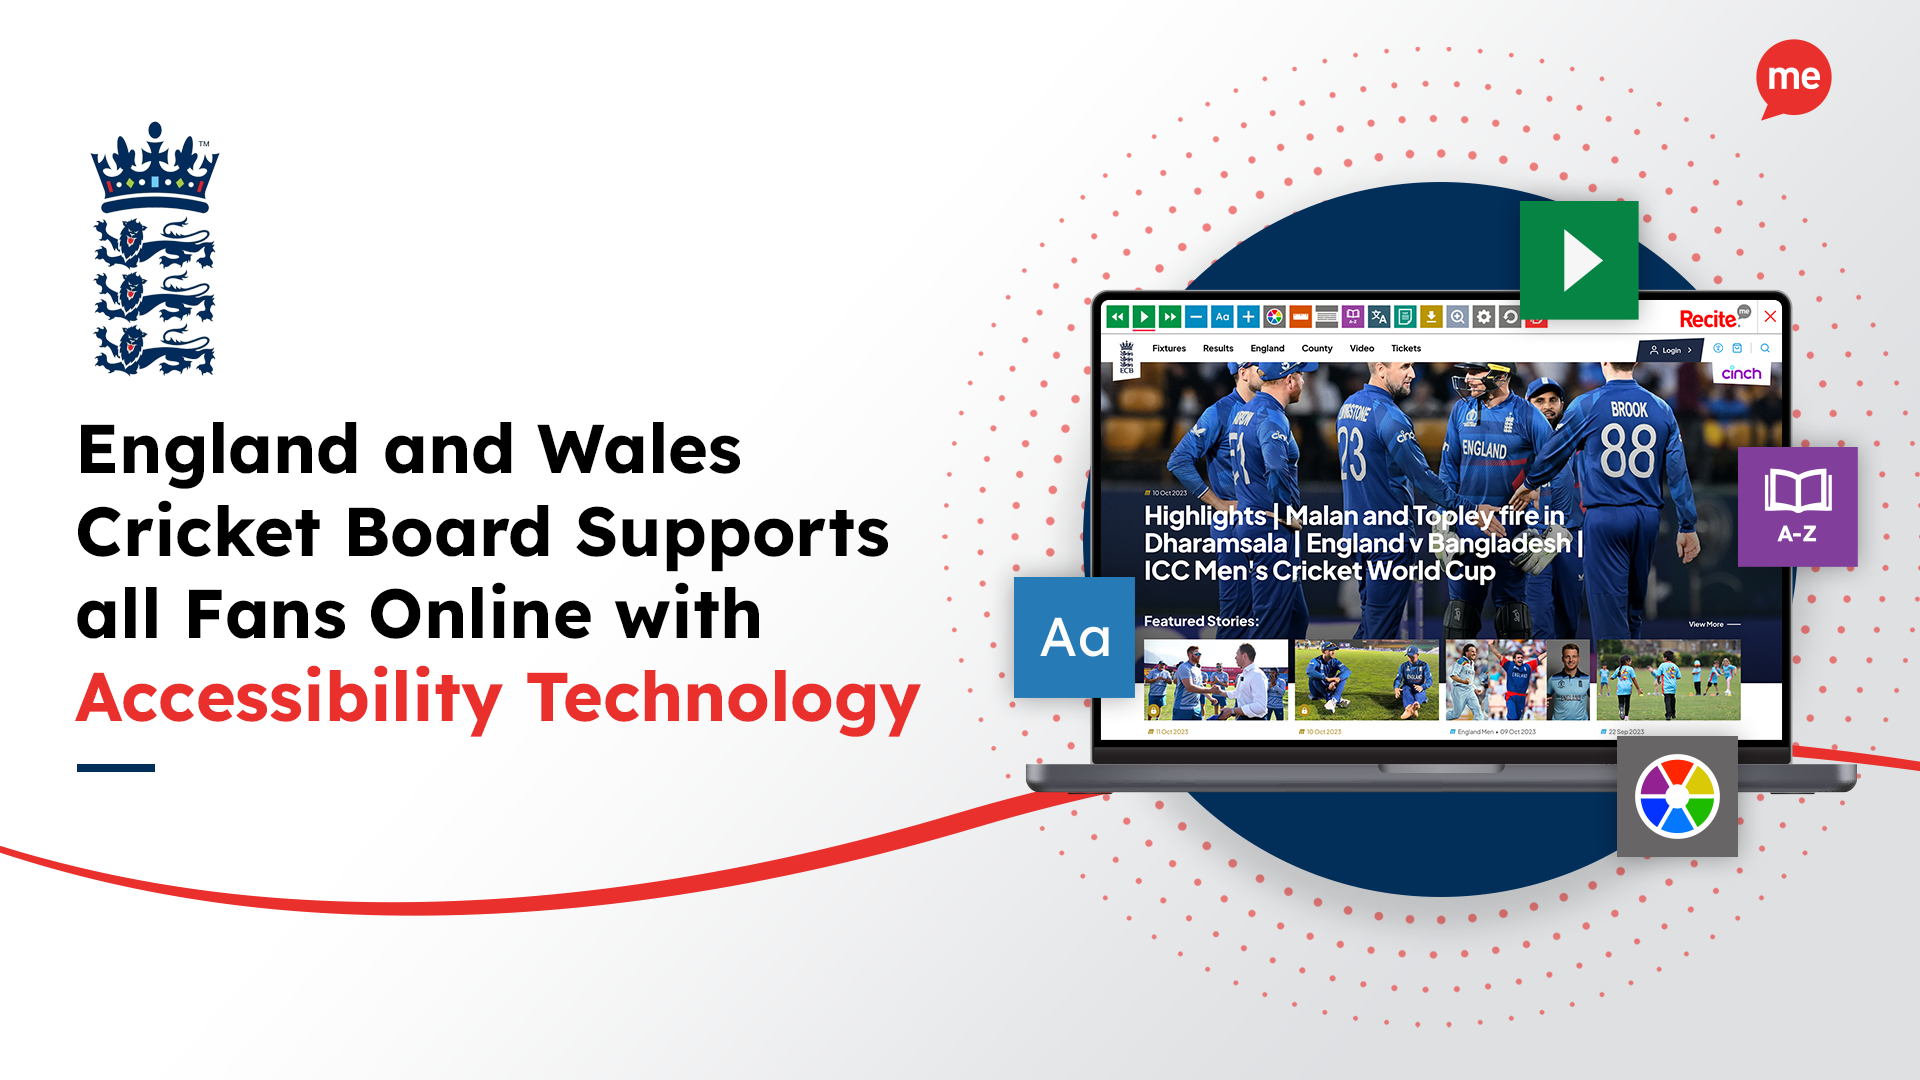 England and Wales Cricket Board Supports all Fans Online with Accessibility Technology